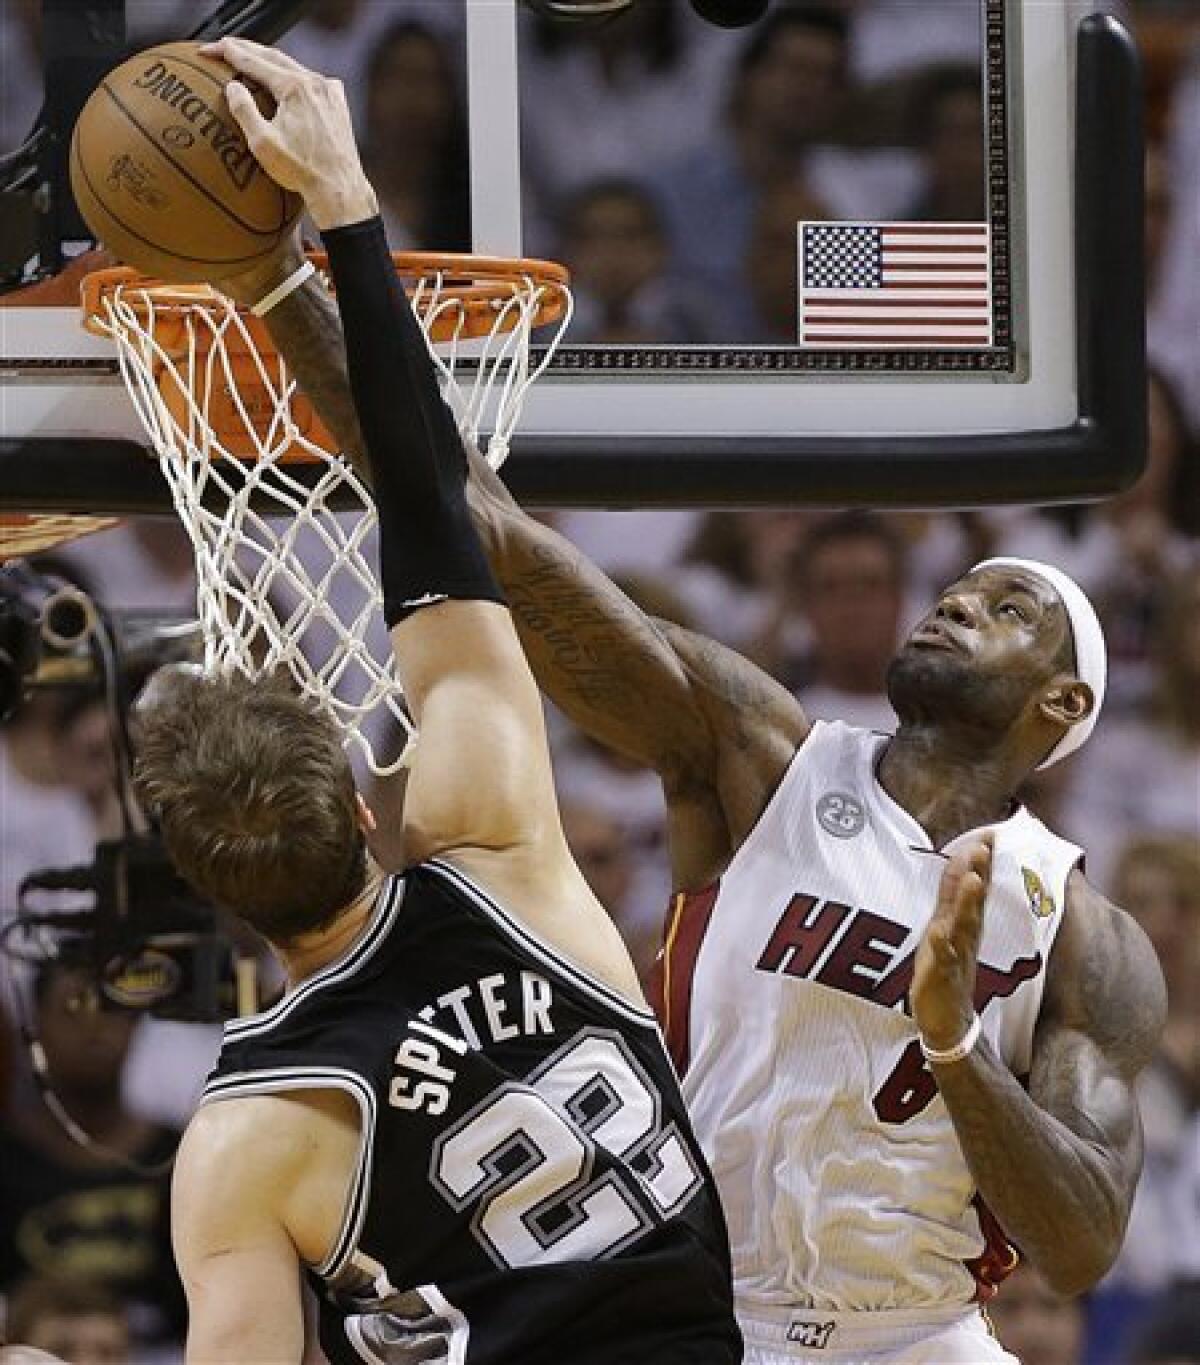 Spurs' Danny Green: Heat's LeBron James 'stopped himself' in Game